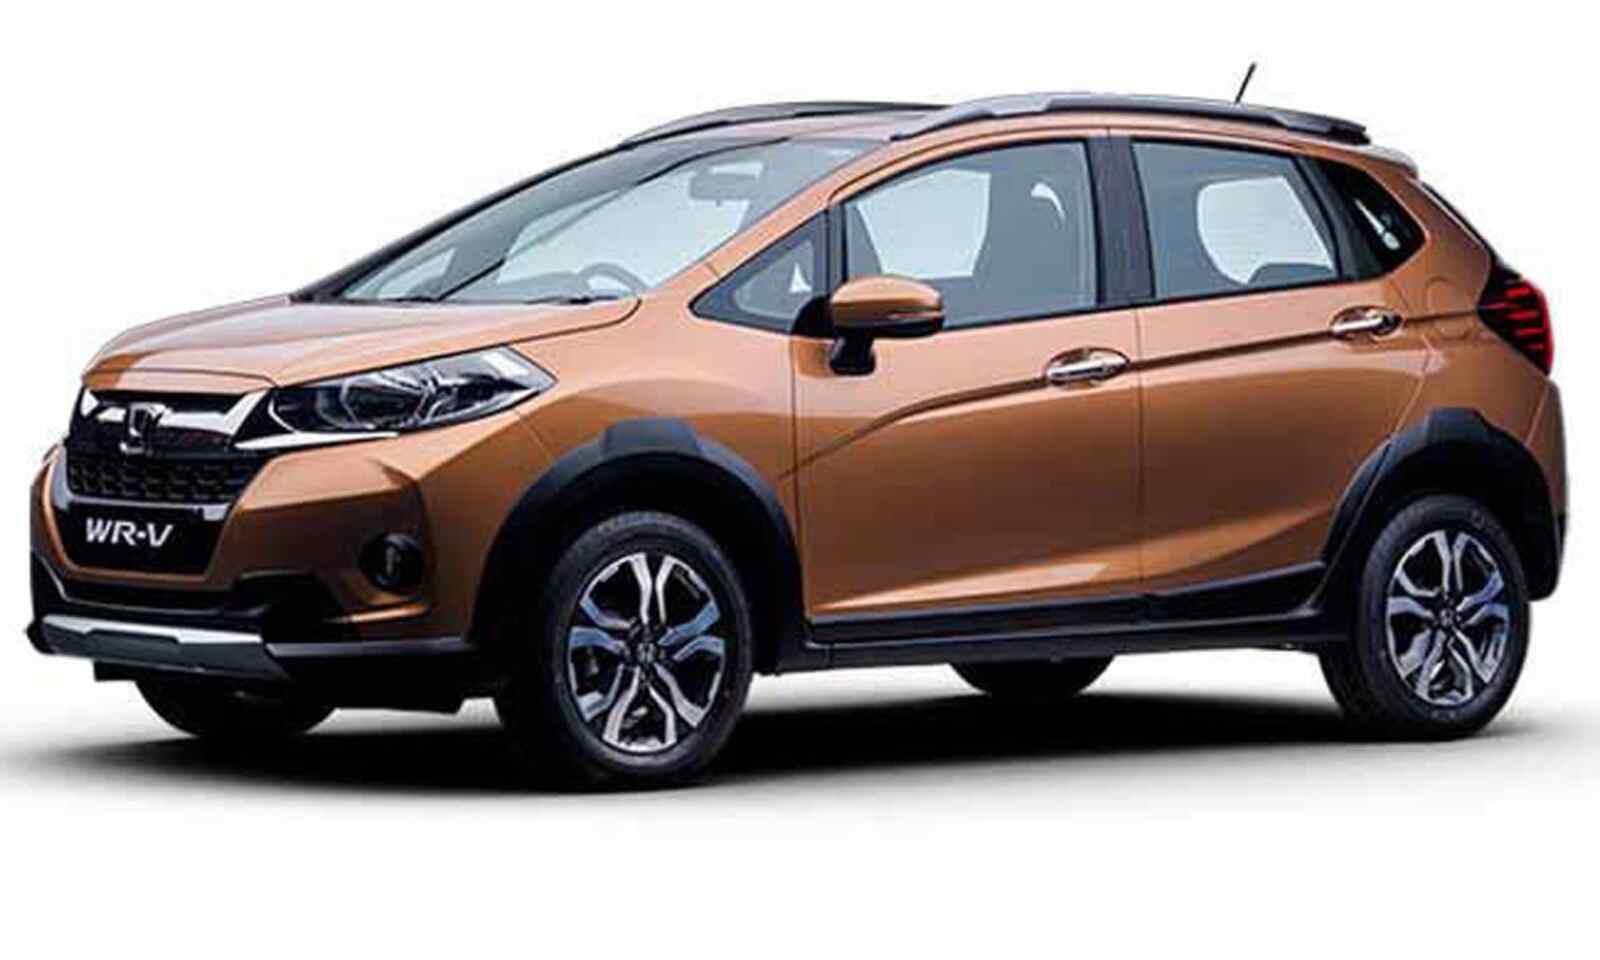 Honda's Trouble is due to Lack of SUV's & Tough Competition from